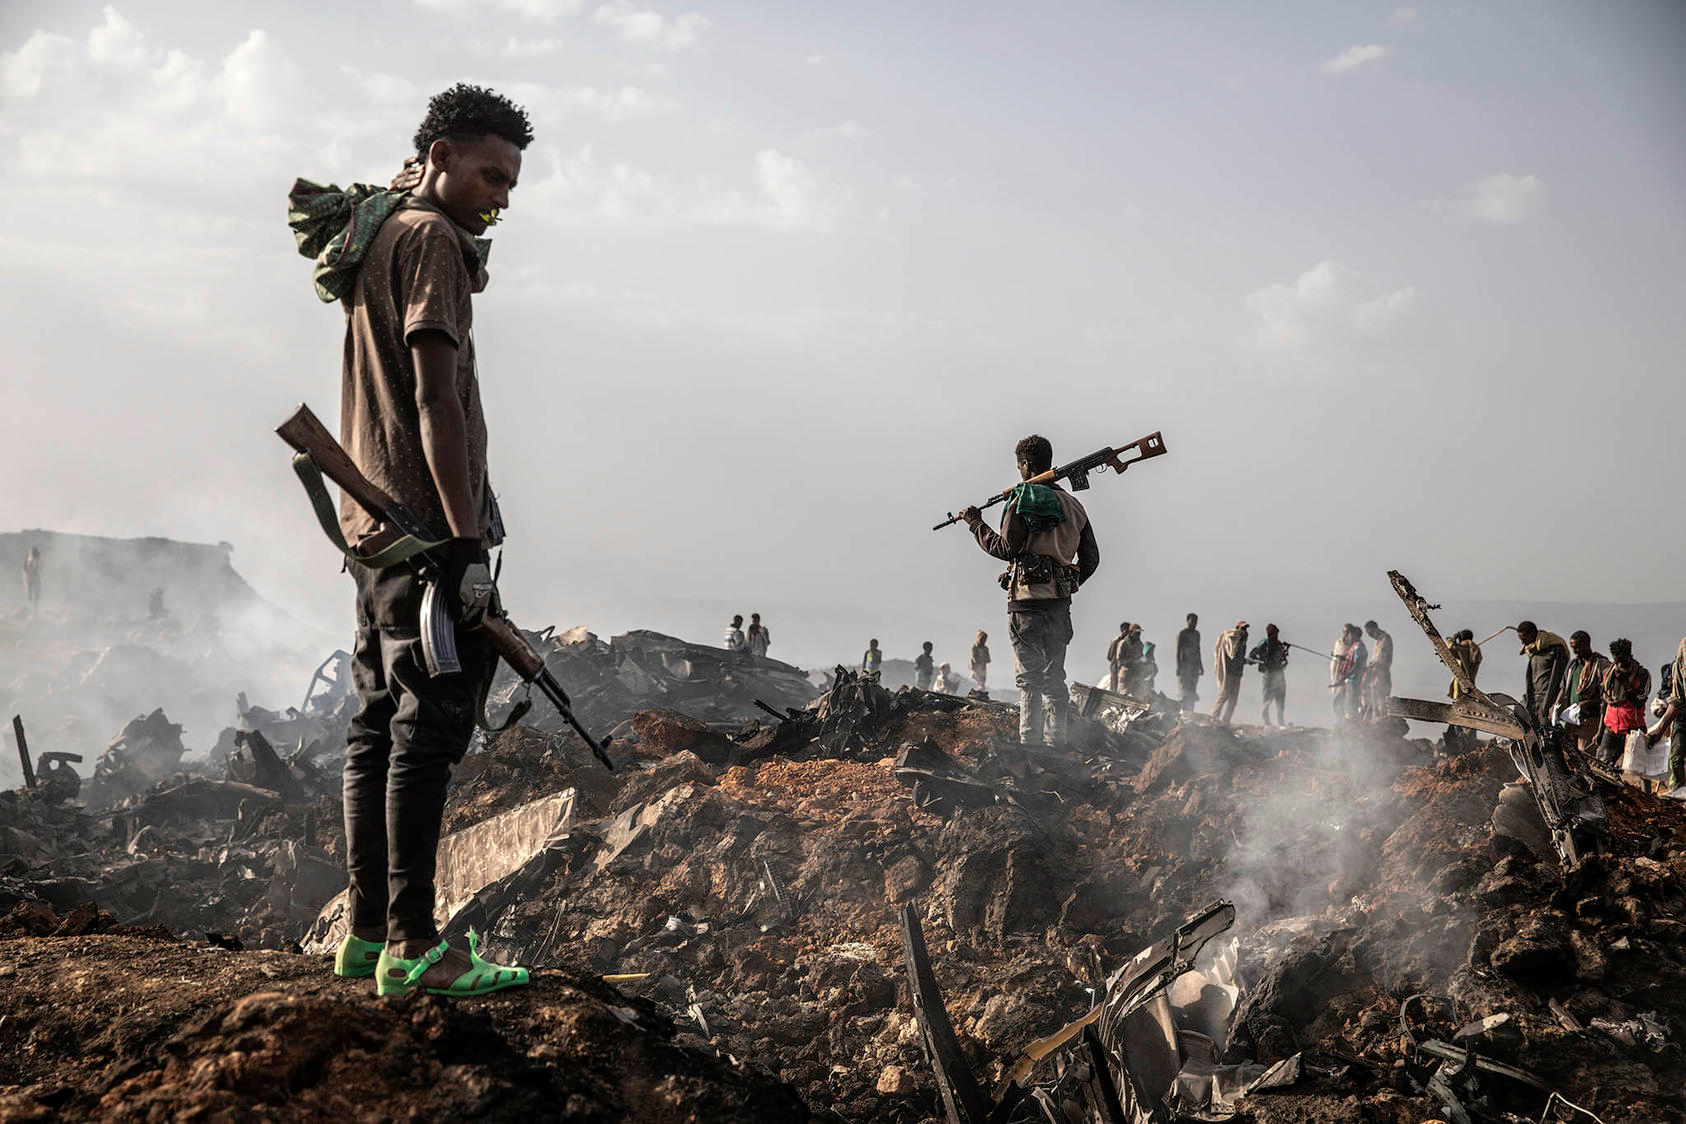 Ethiopia’s civil war is raging. How can it get on track toward peace?